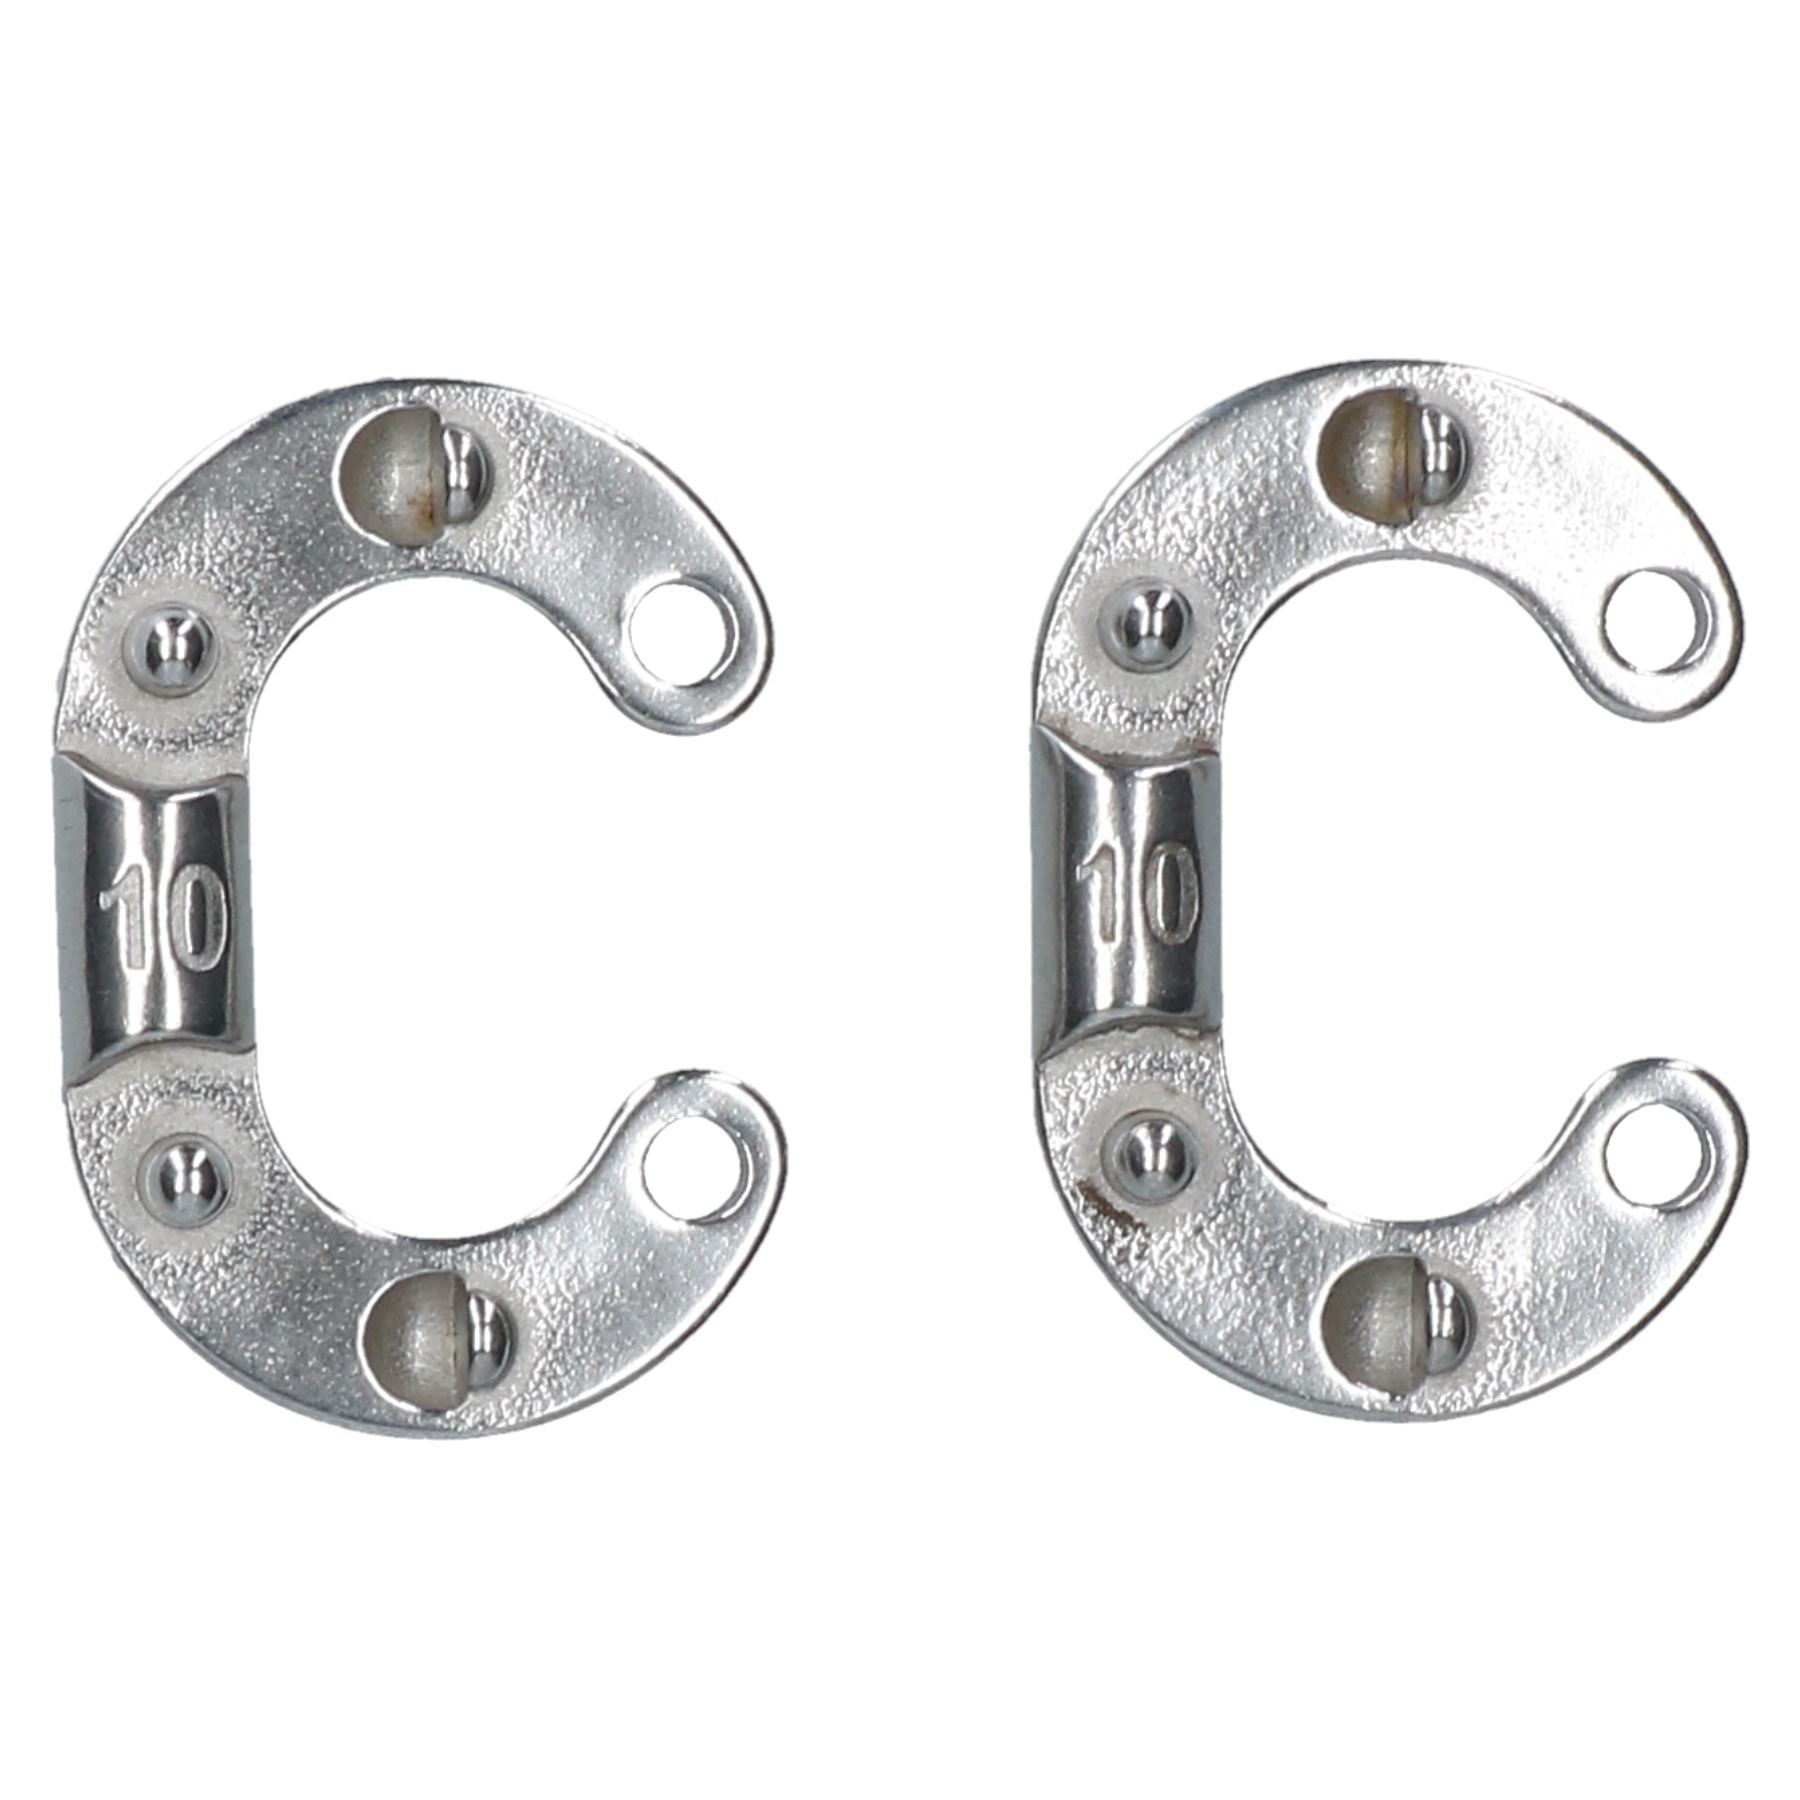 Chain Connecting Link 10mm Marine Grade Stainless Steel Split Shackle